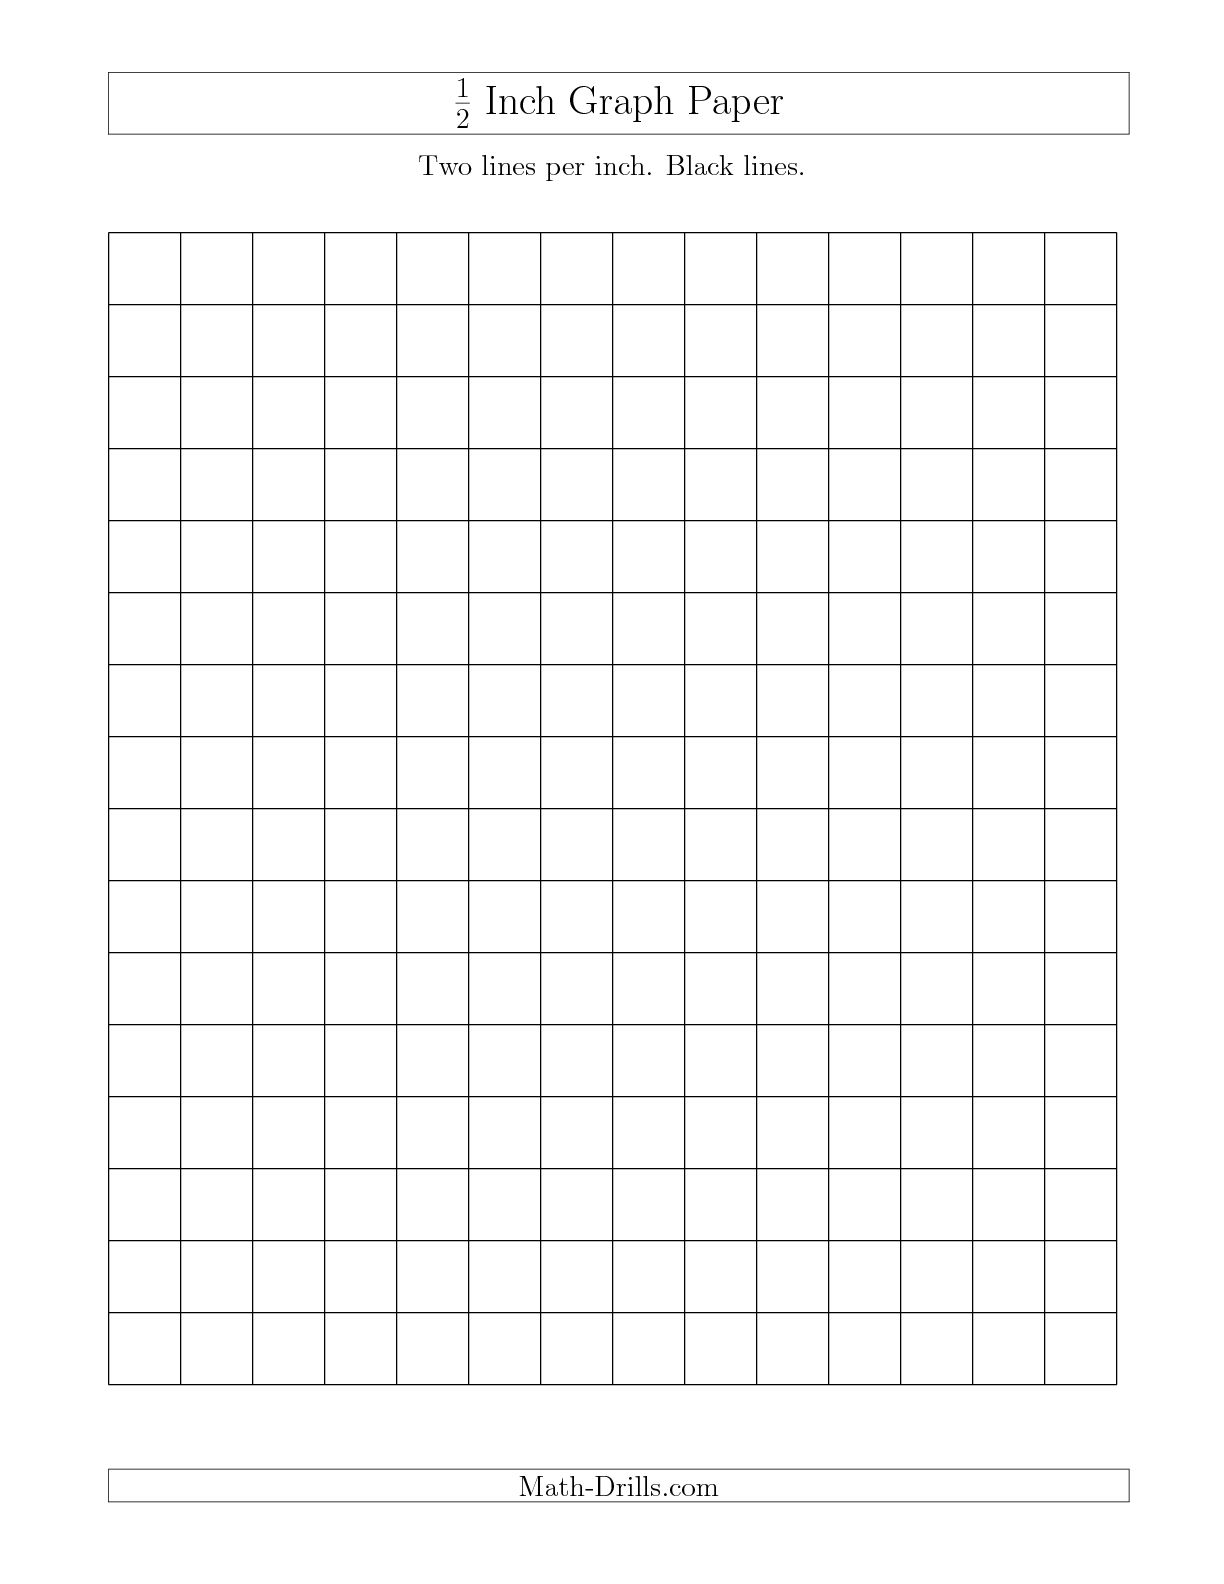 7-best-images-of-printable-1-2-inch-grid-graph-paper-1-2-inch-grid-paper-printable-half-inch